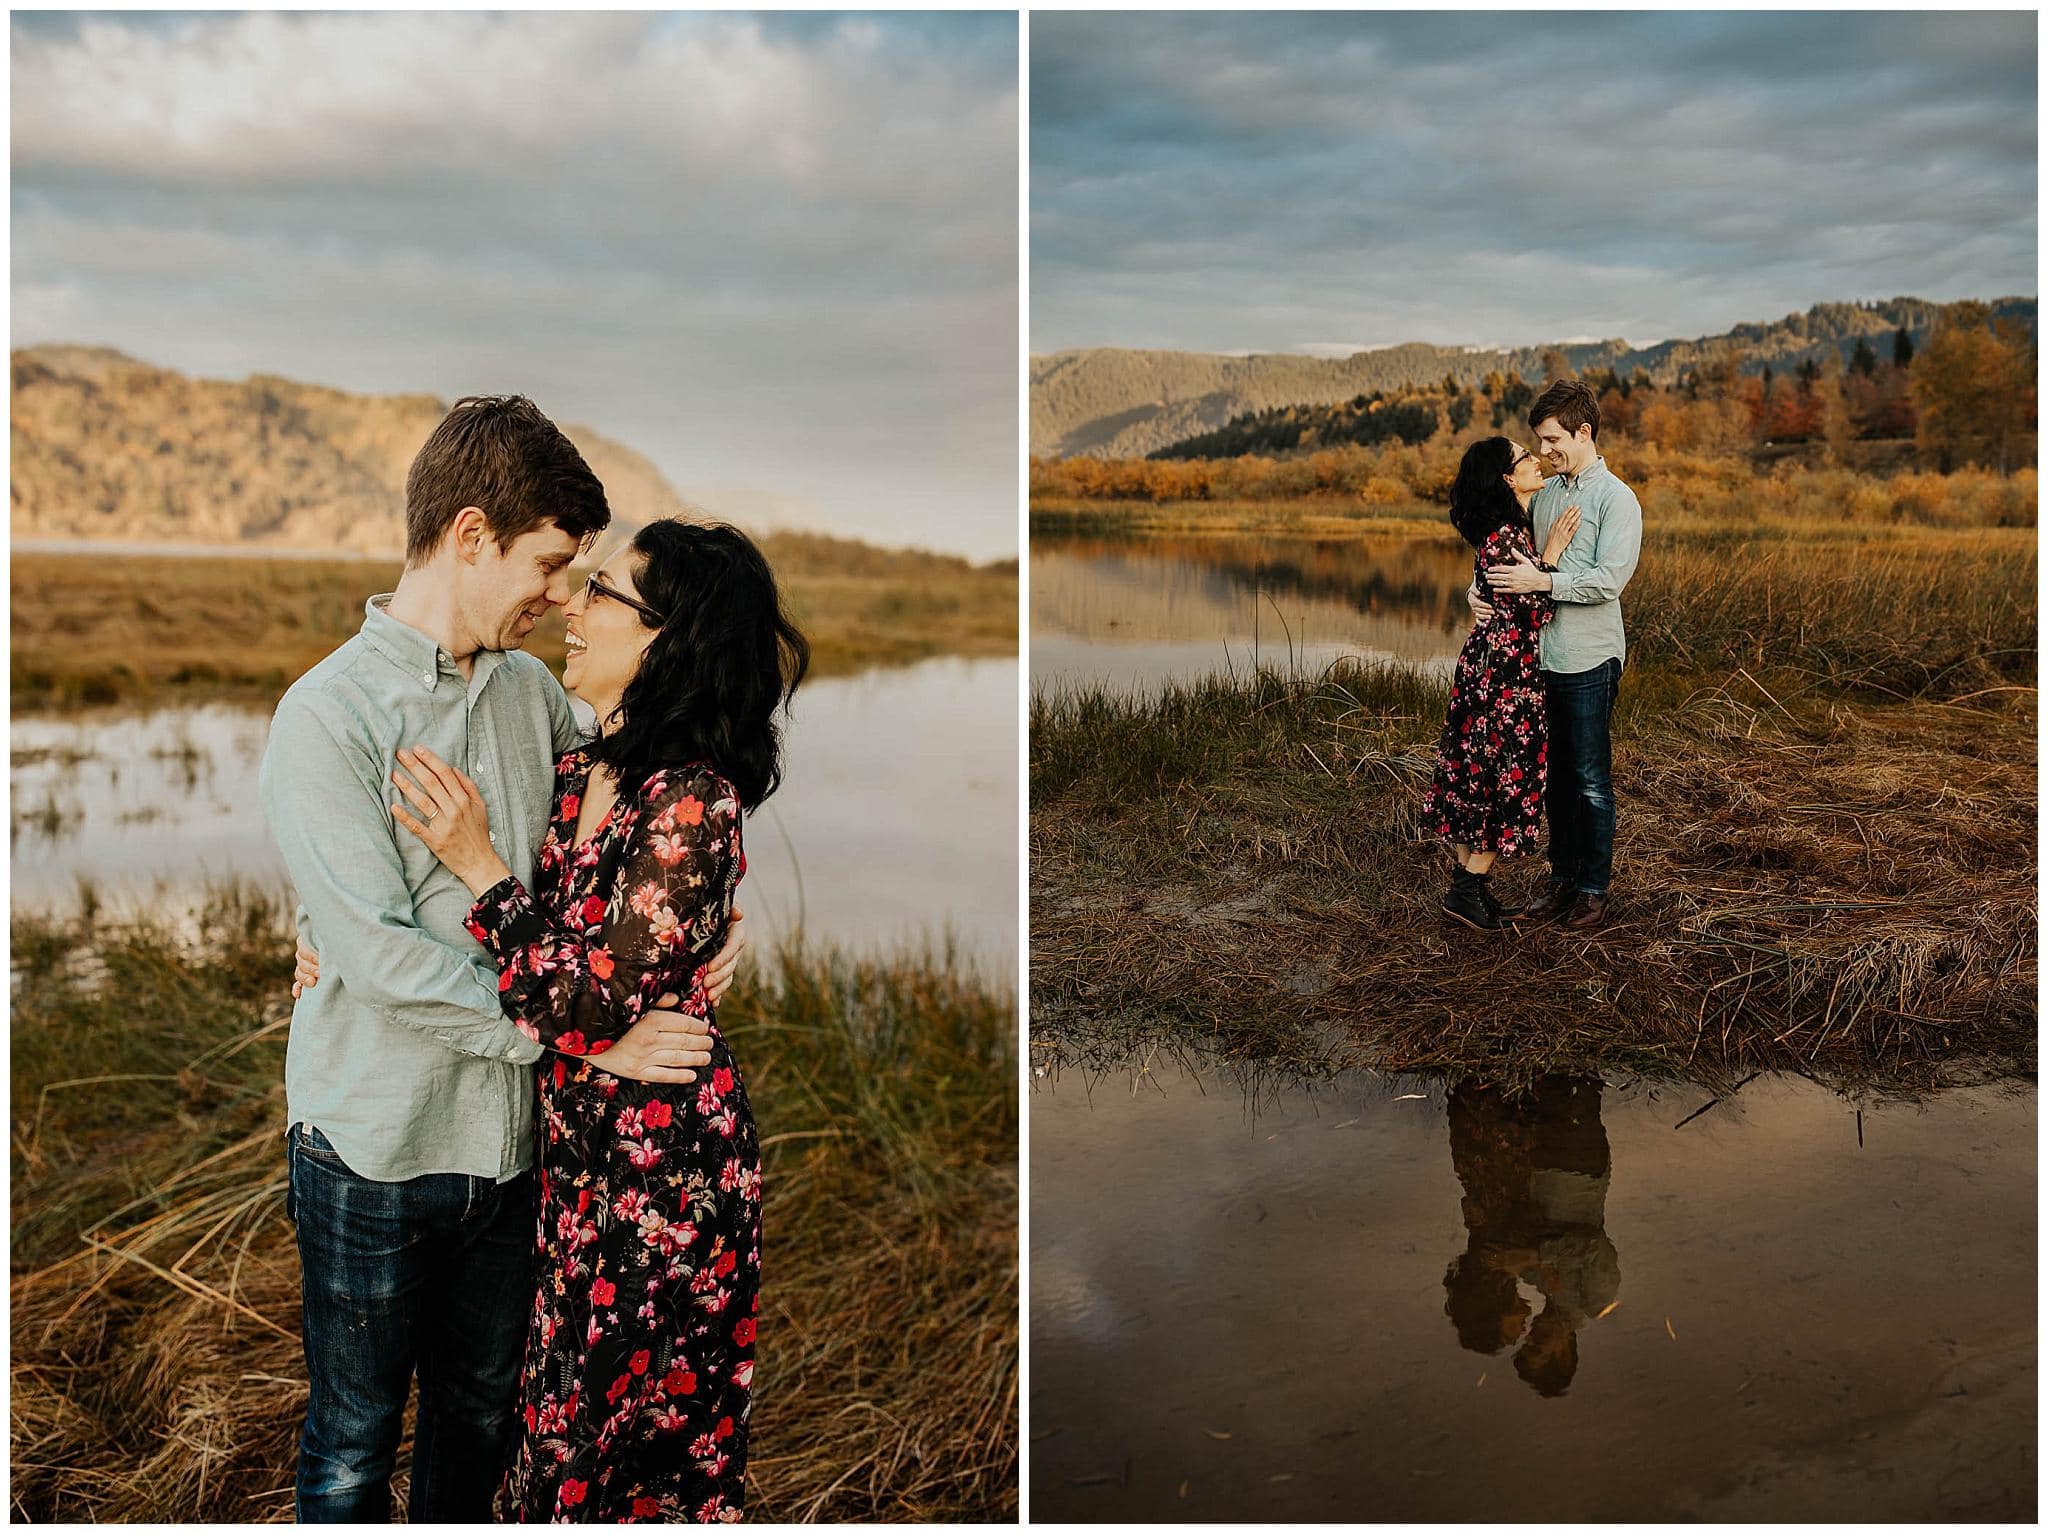 Couple embracing with thier image reflected in a puddle - locations for couples photography